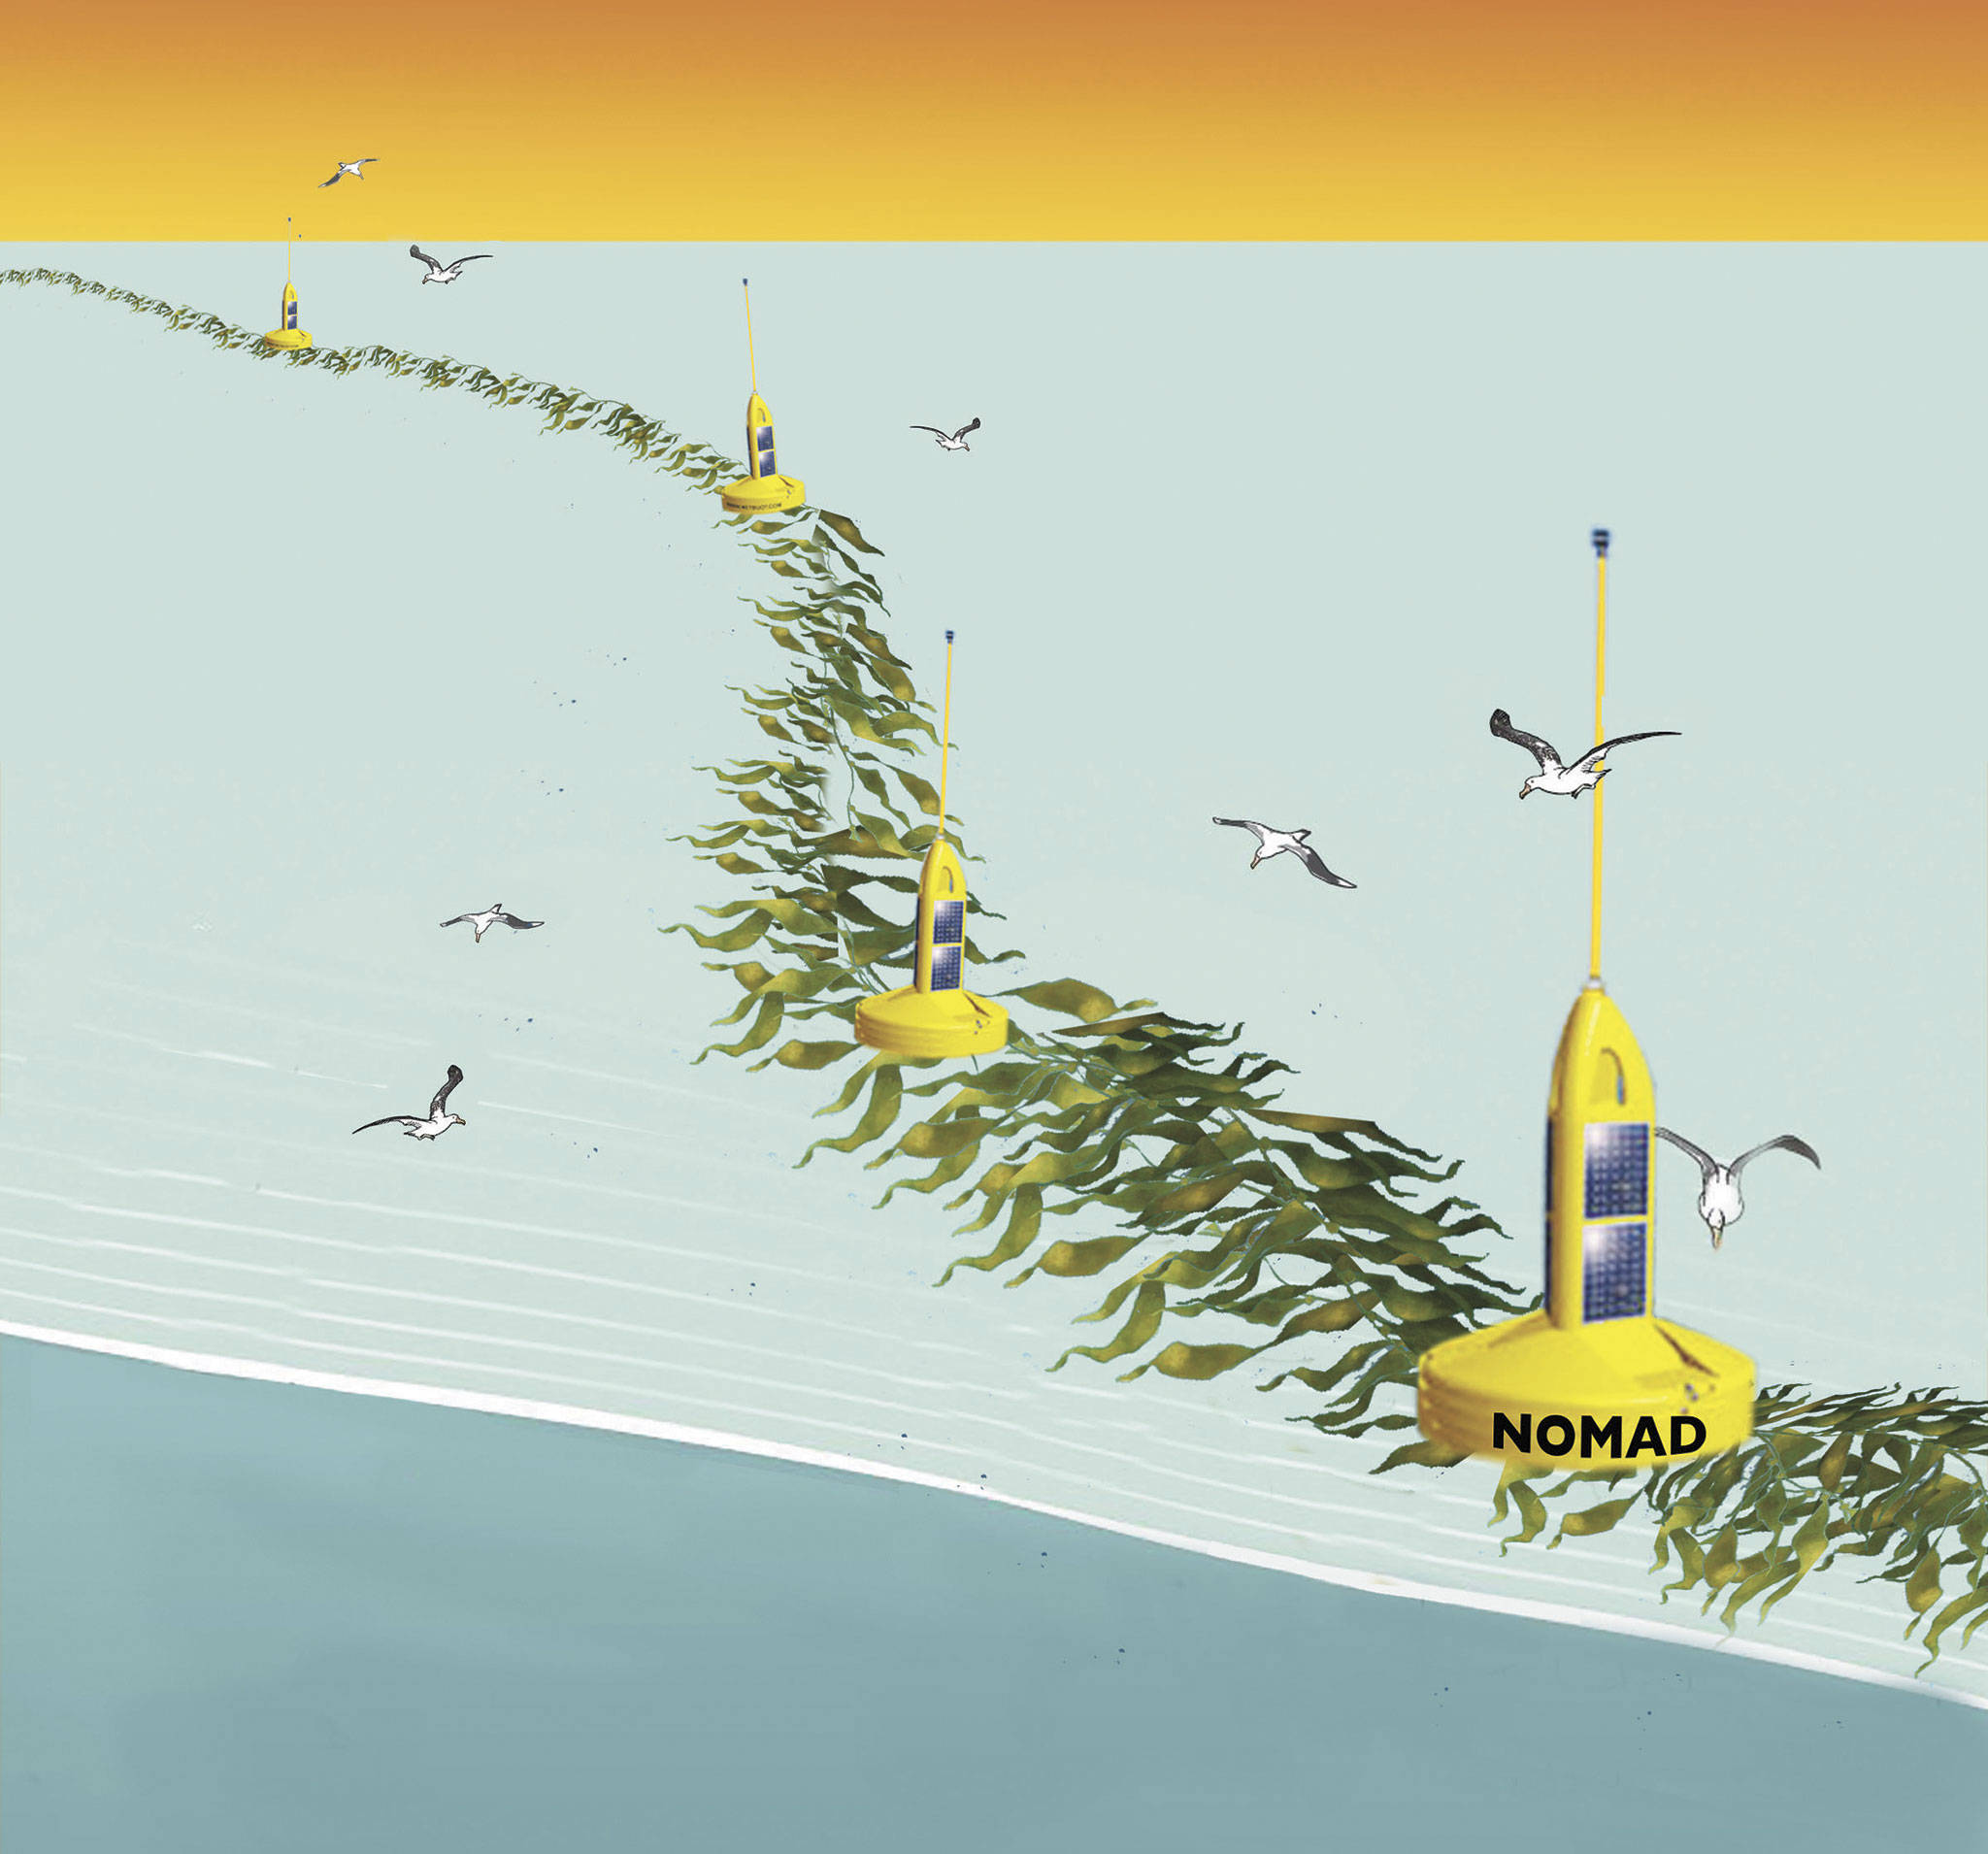 Reliance Laboratories                                Scientists and researchers on the Olympic Peninsula are developing a project called NOMAD, or Nautical Offshore Macroalgal Autonomous Device, which floats along the Pacific Ocean to grow seaweed for use later as biofuel.